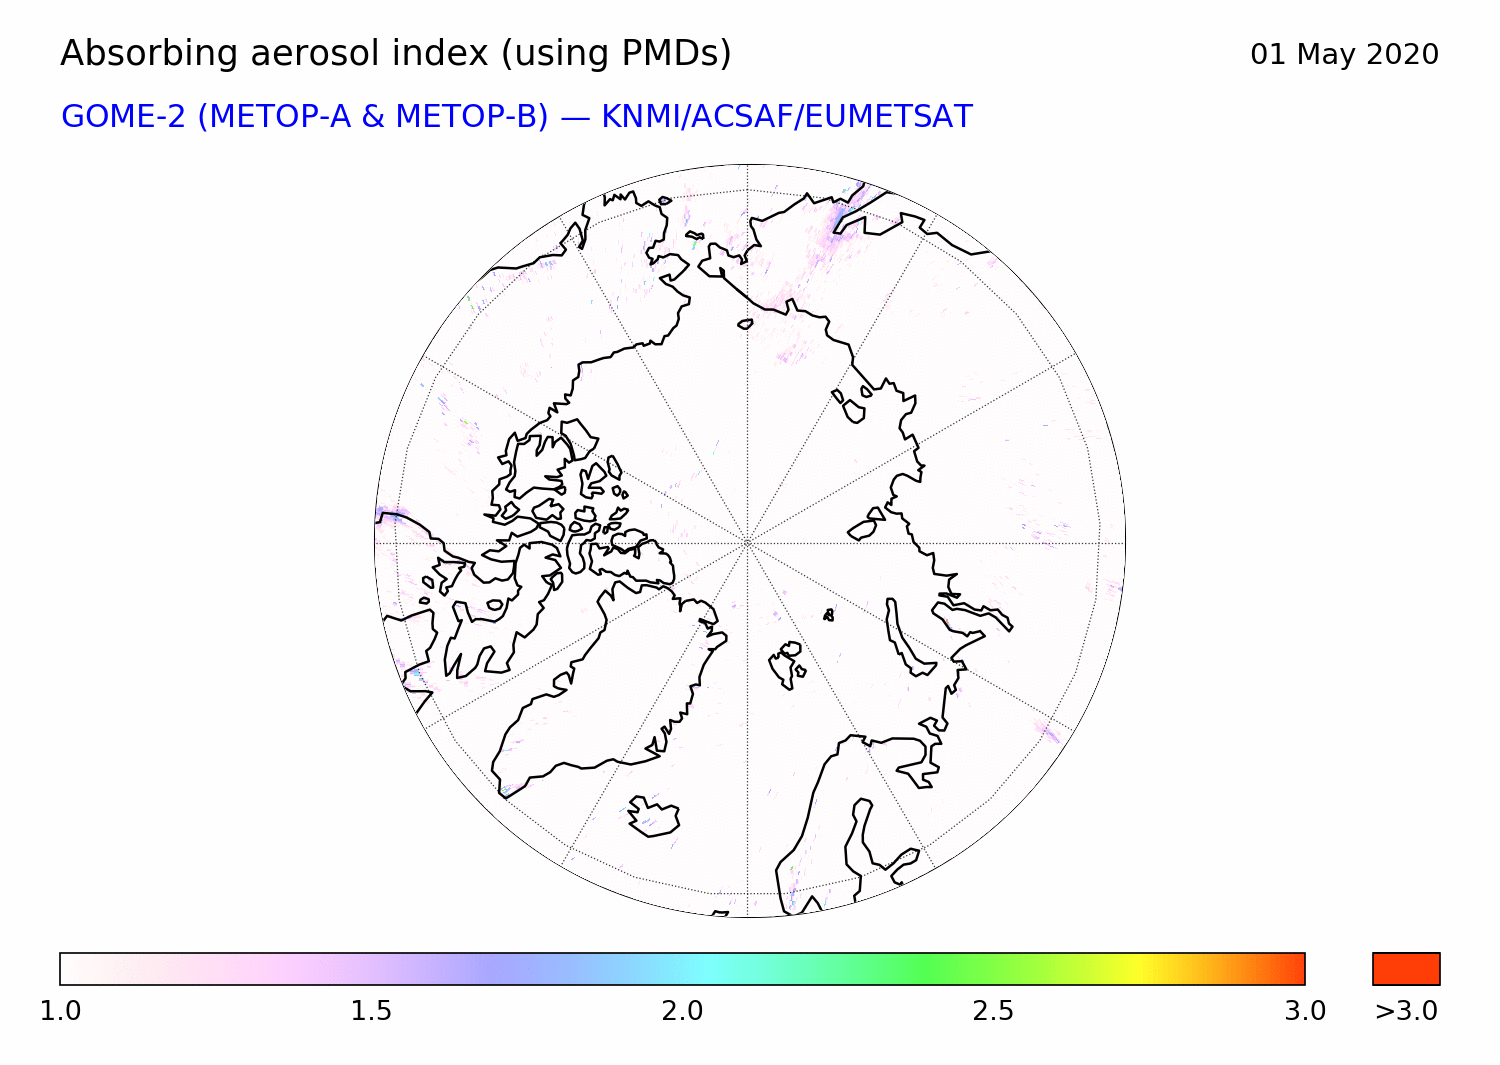 GOME-2 - Absorbing aerosol index of 01 May 2020